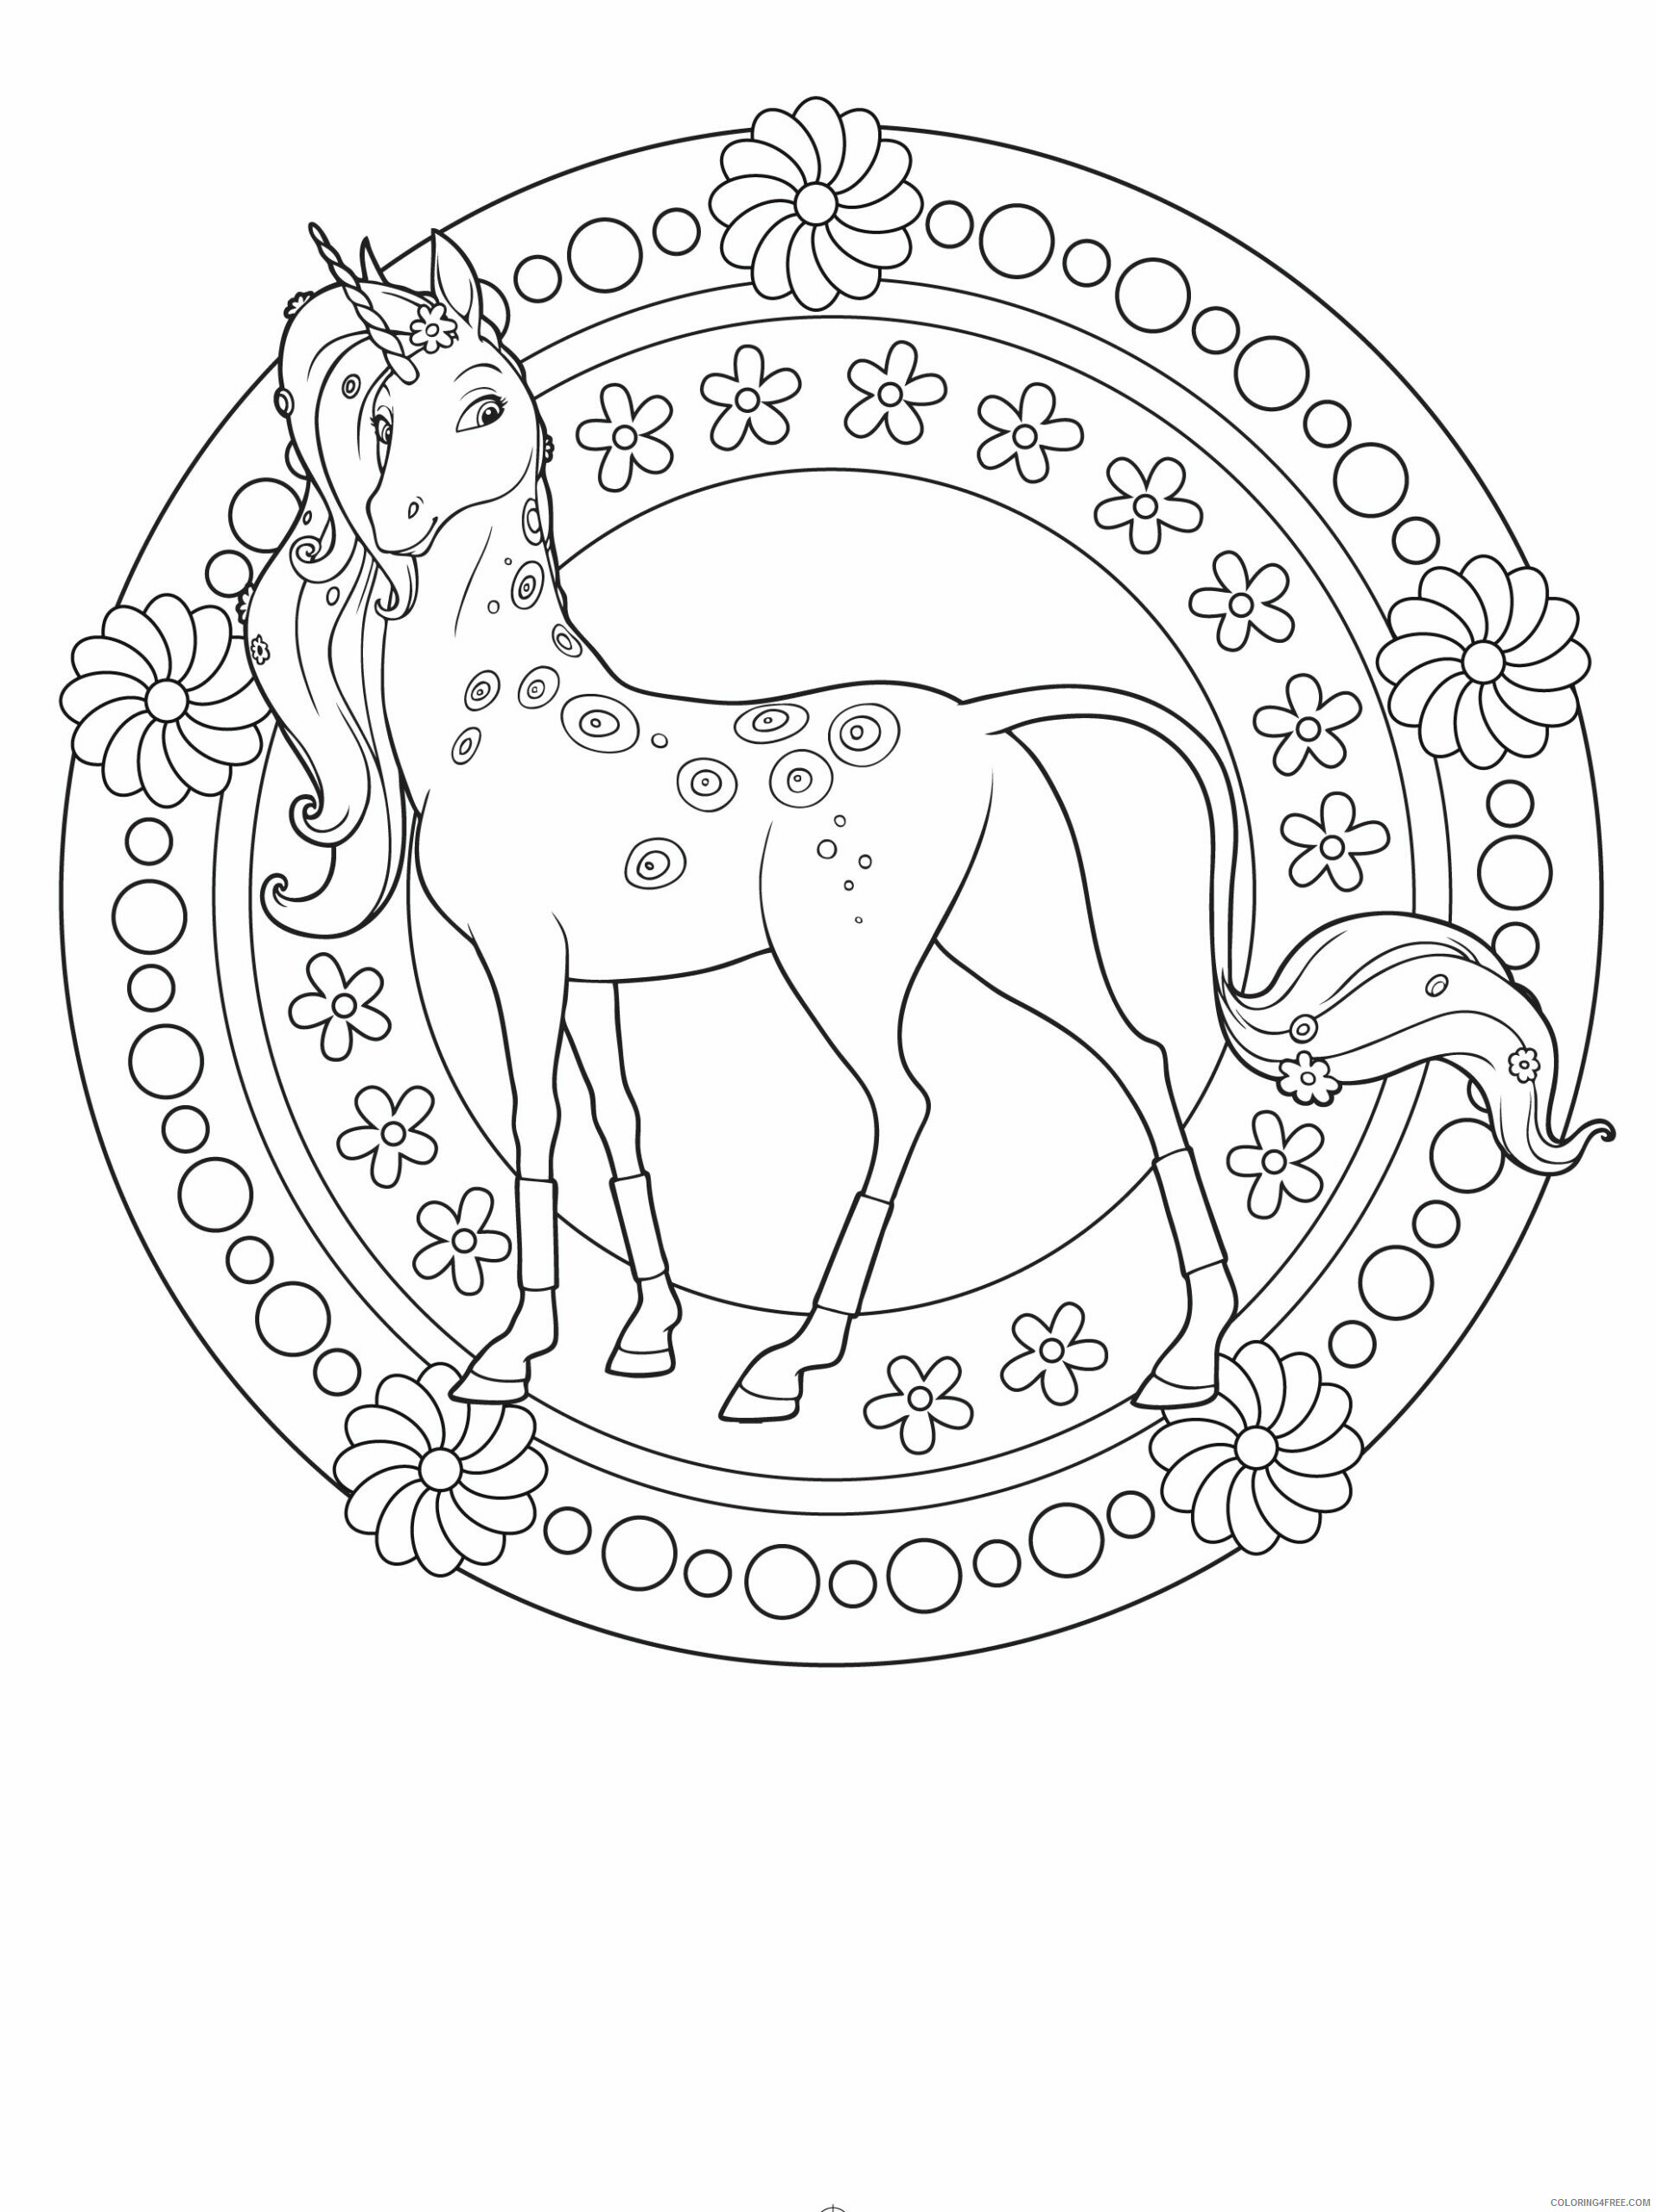 Mia and Me Coloring Pages TV Film Mia and Me Unicorn Printable 2020 05091 Coloring4free